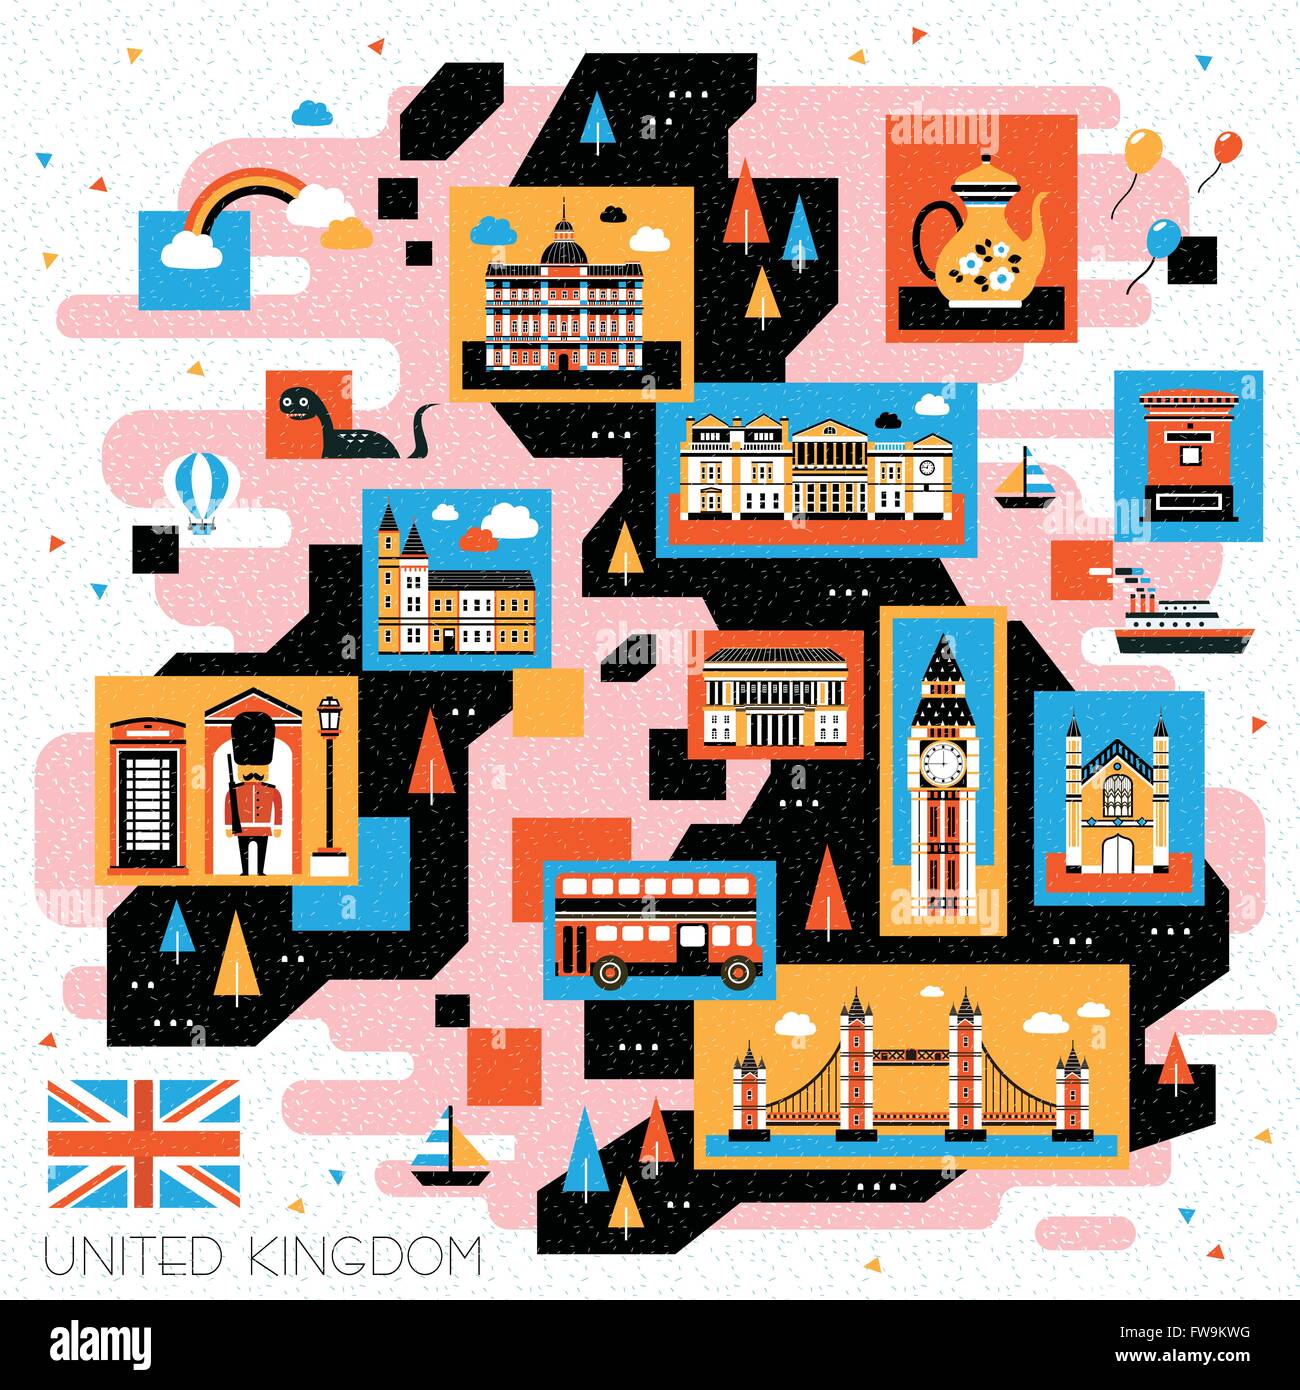 modern United Kingdom travel map design with attractions in multicolor Stock Vector